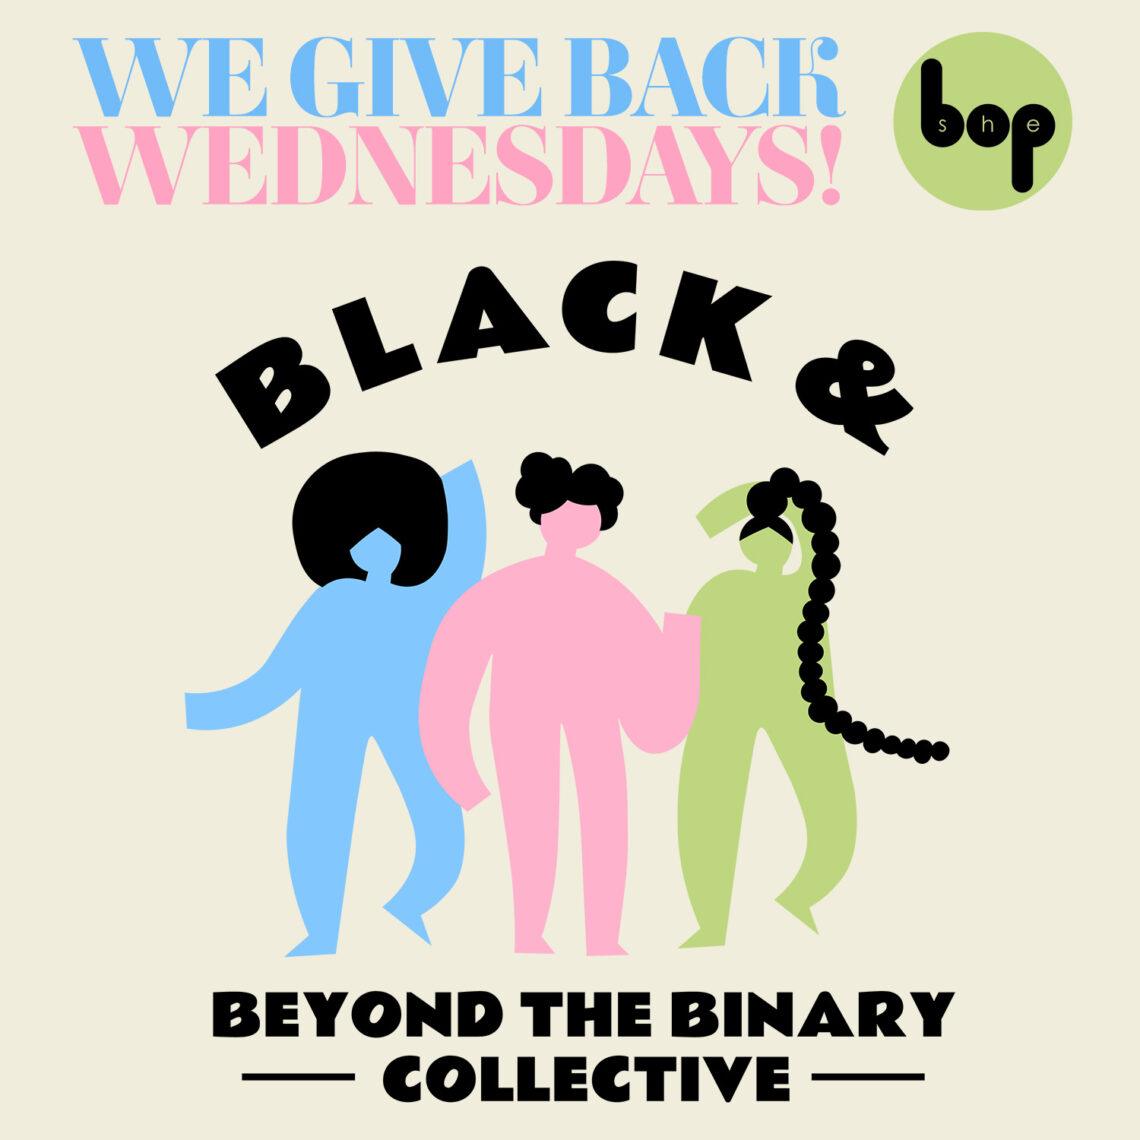 We Give Back Wednesdays: Black & Beyond the Binary Collective